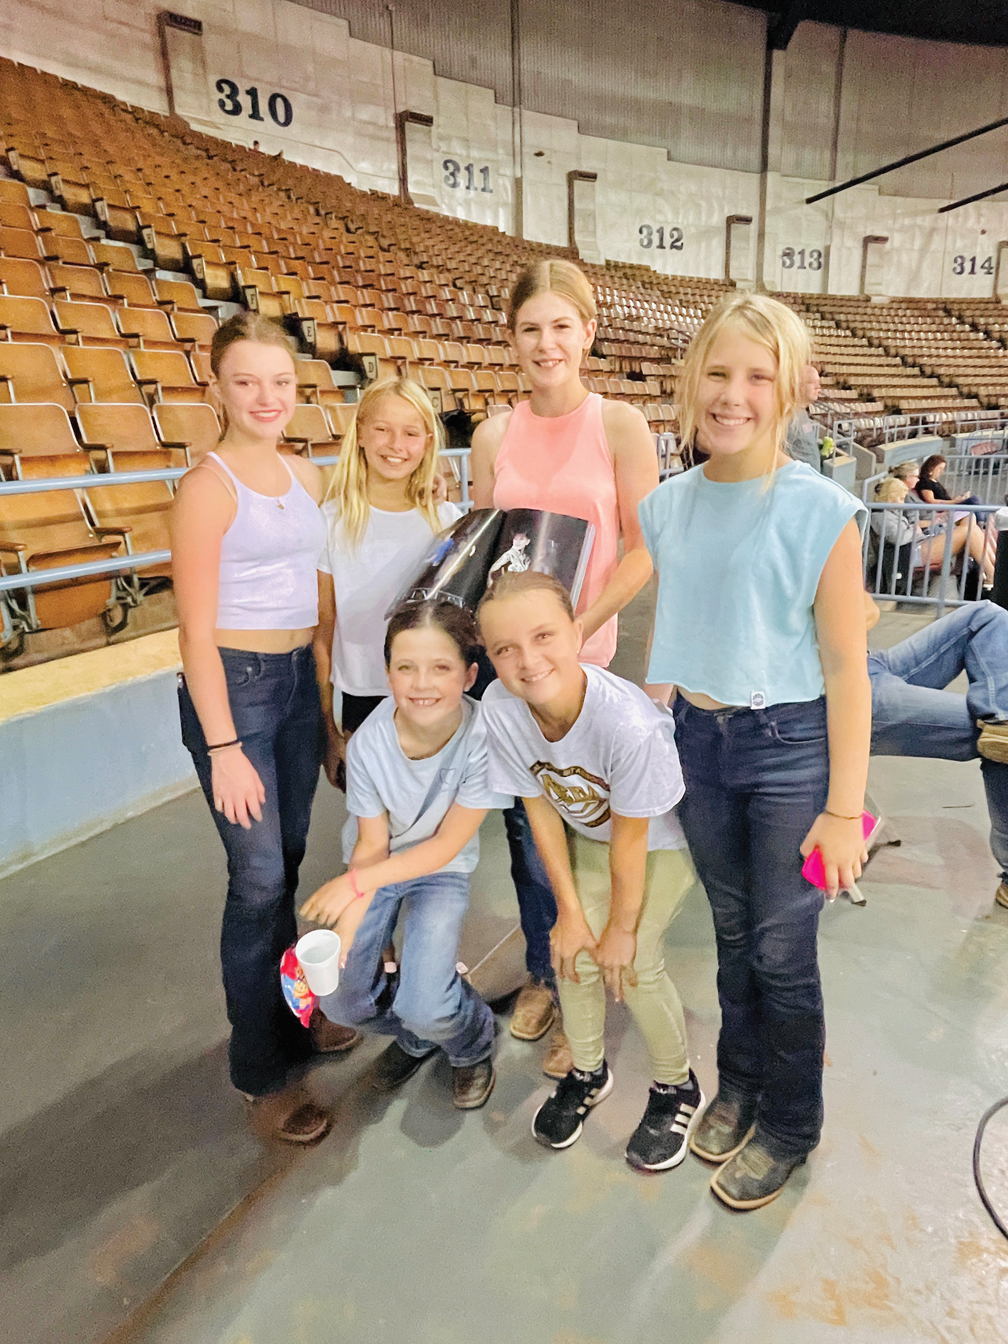 Around the Rings at the 2021 AQHYA Youth World – with the G-Man